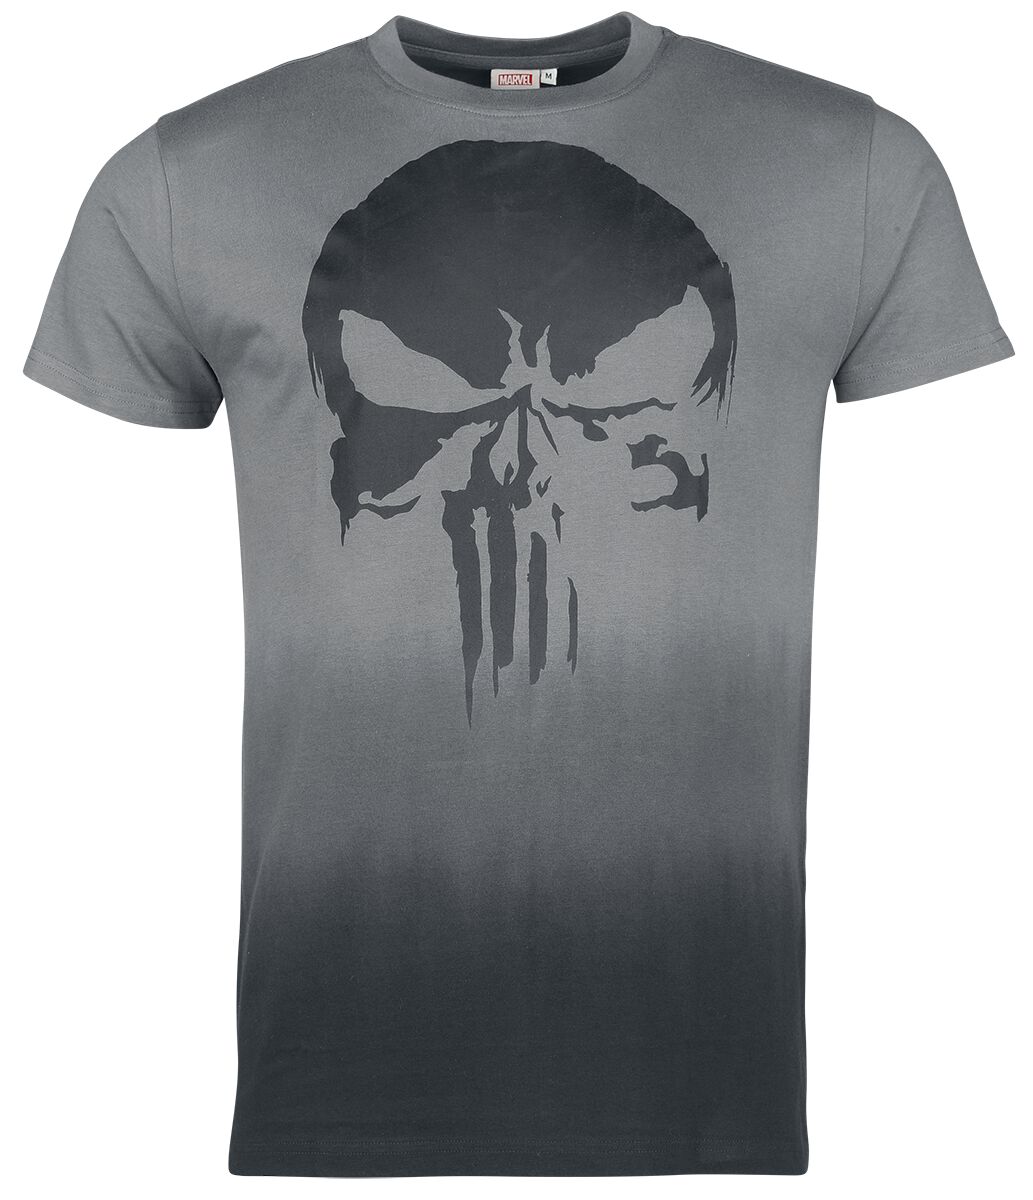 Image of T-Shirt di The Punisher - Logo - S a M - Uomo - multicolore